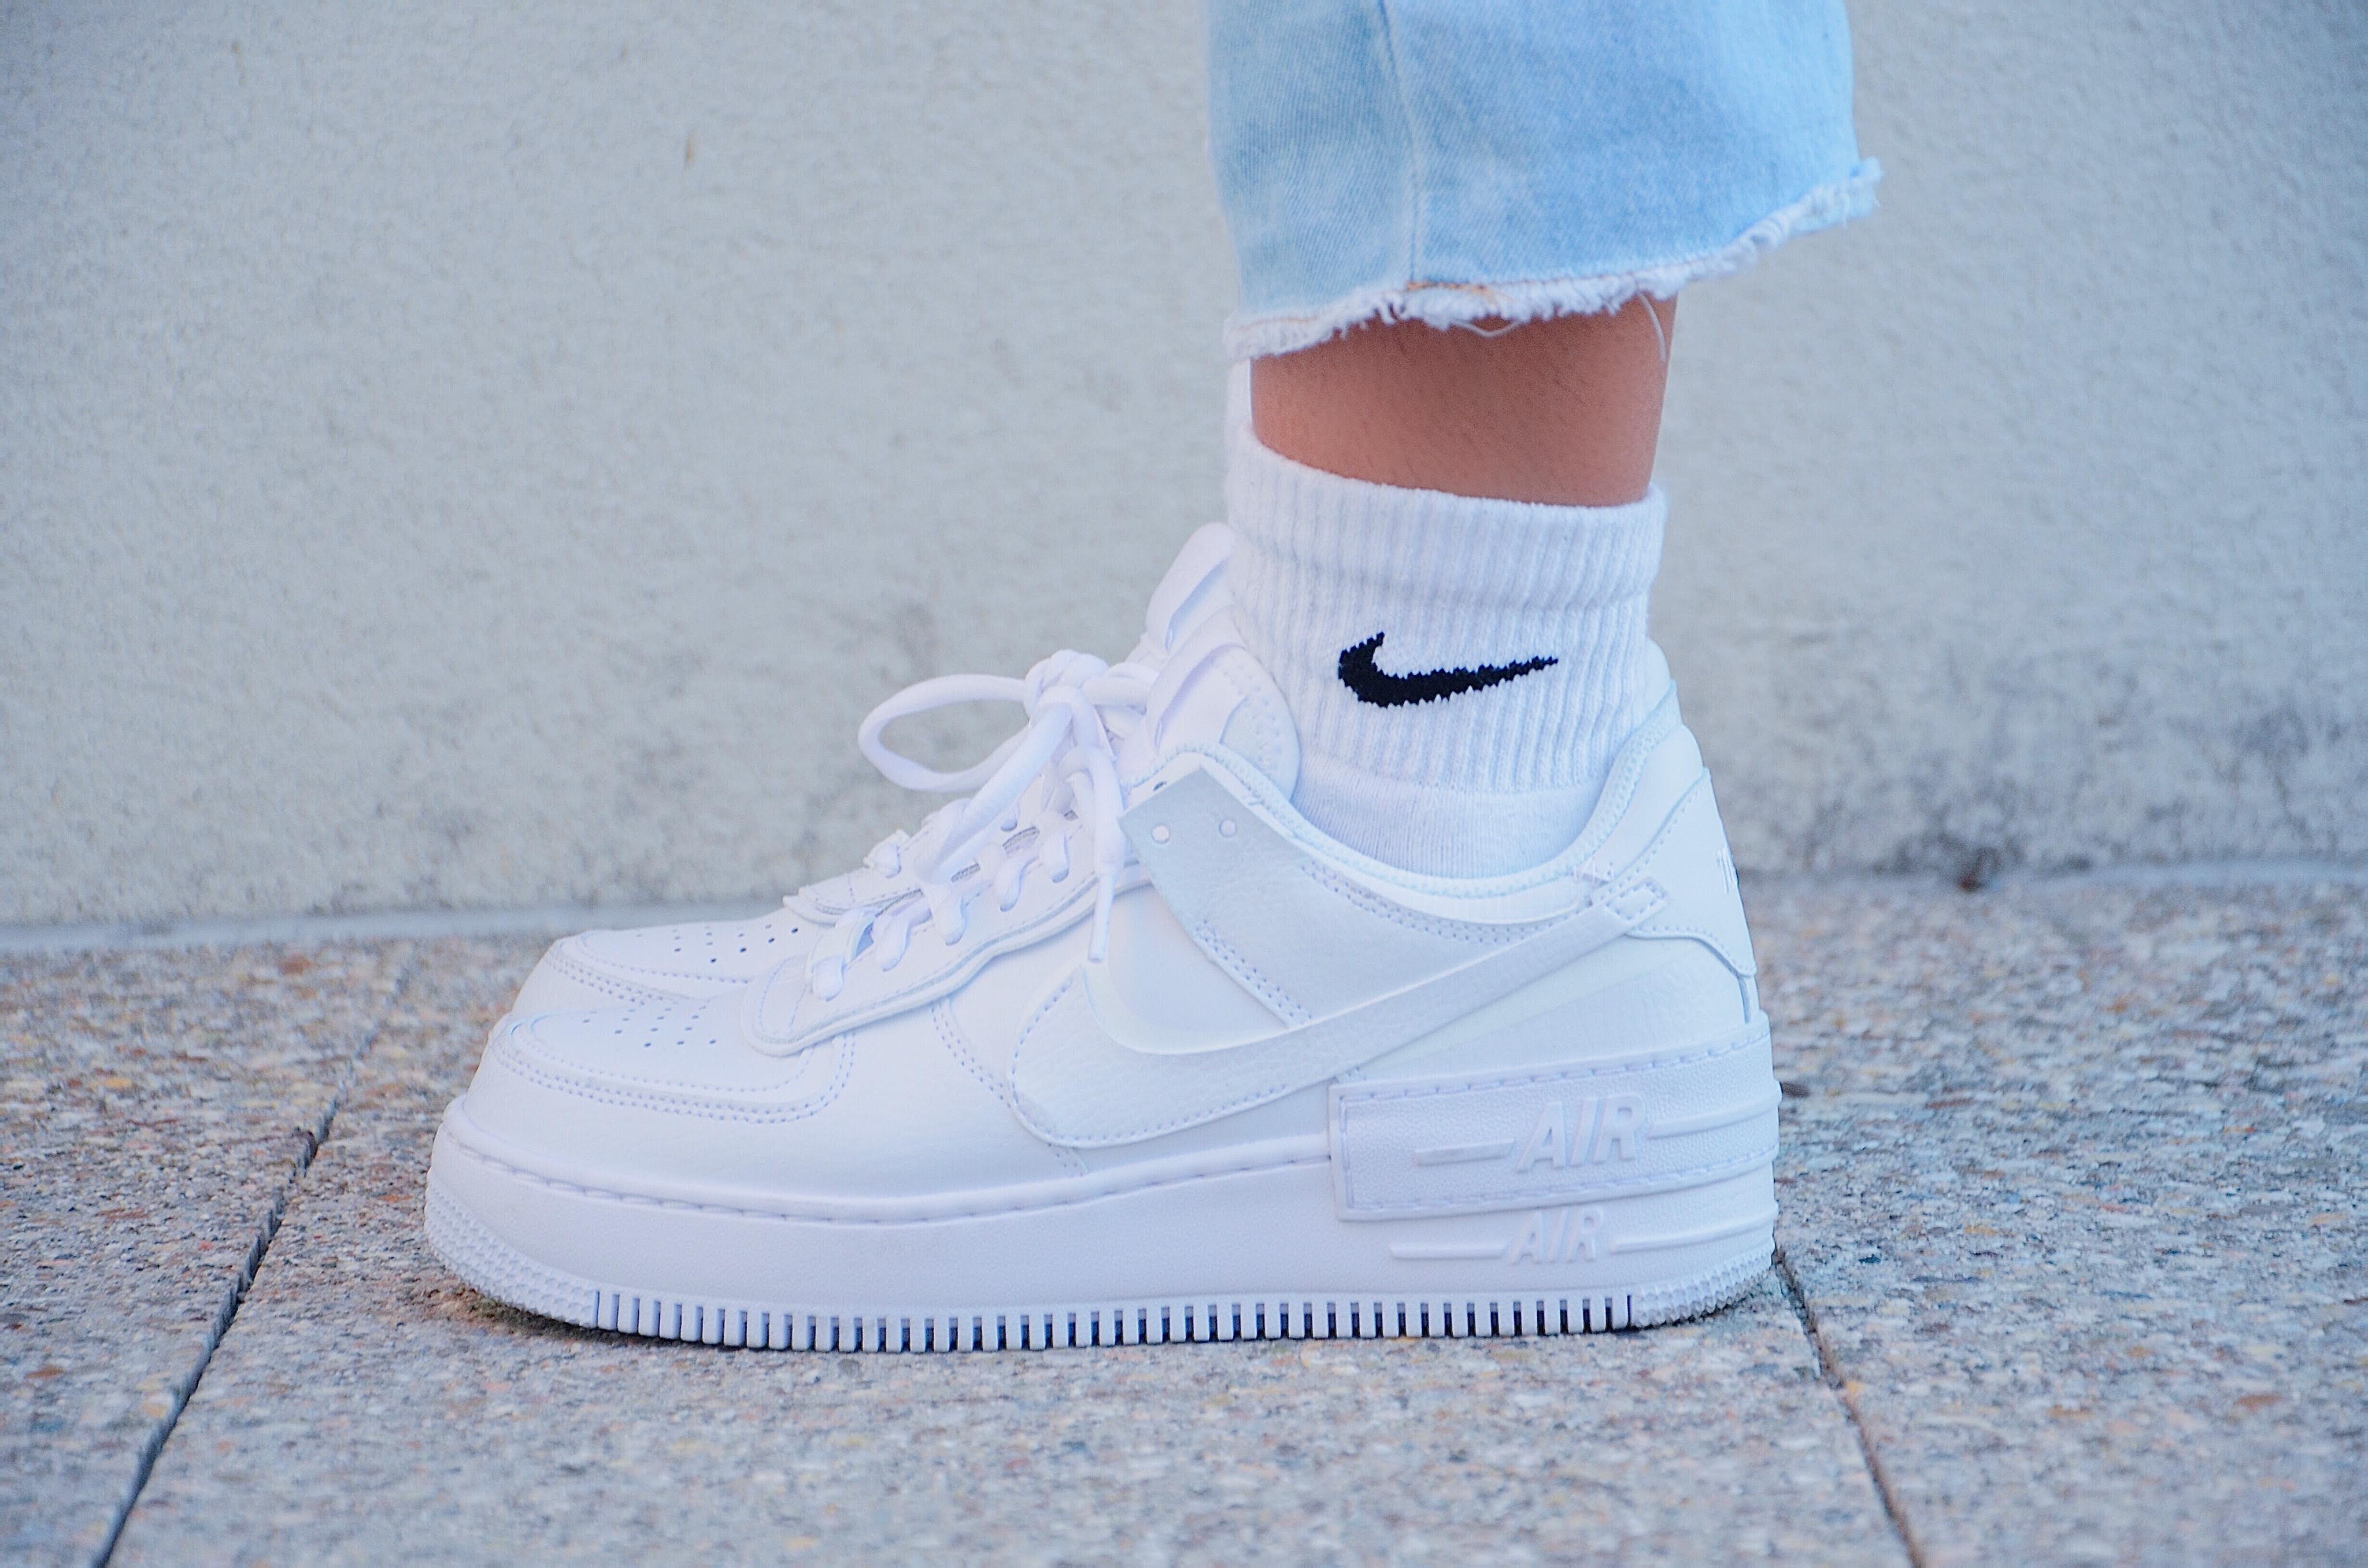 shoes like airforces